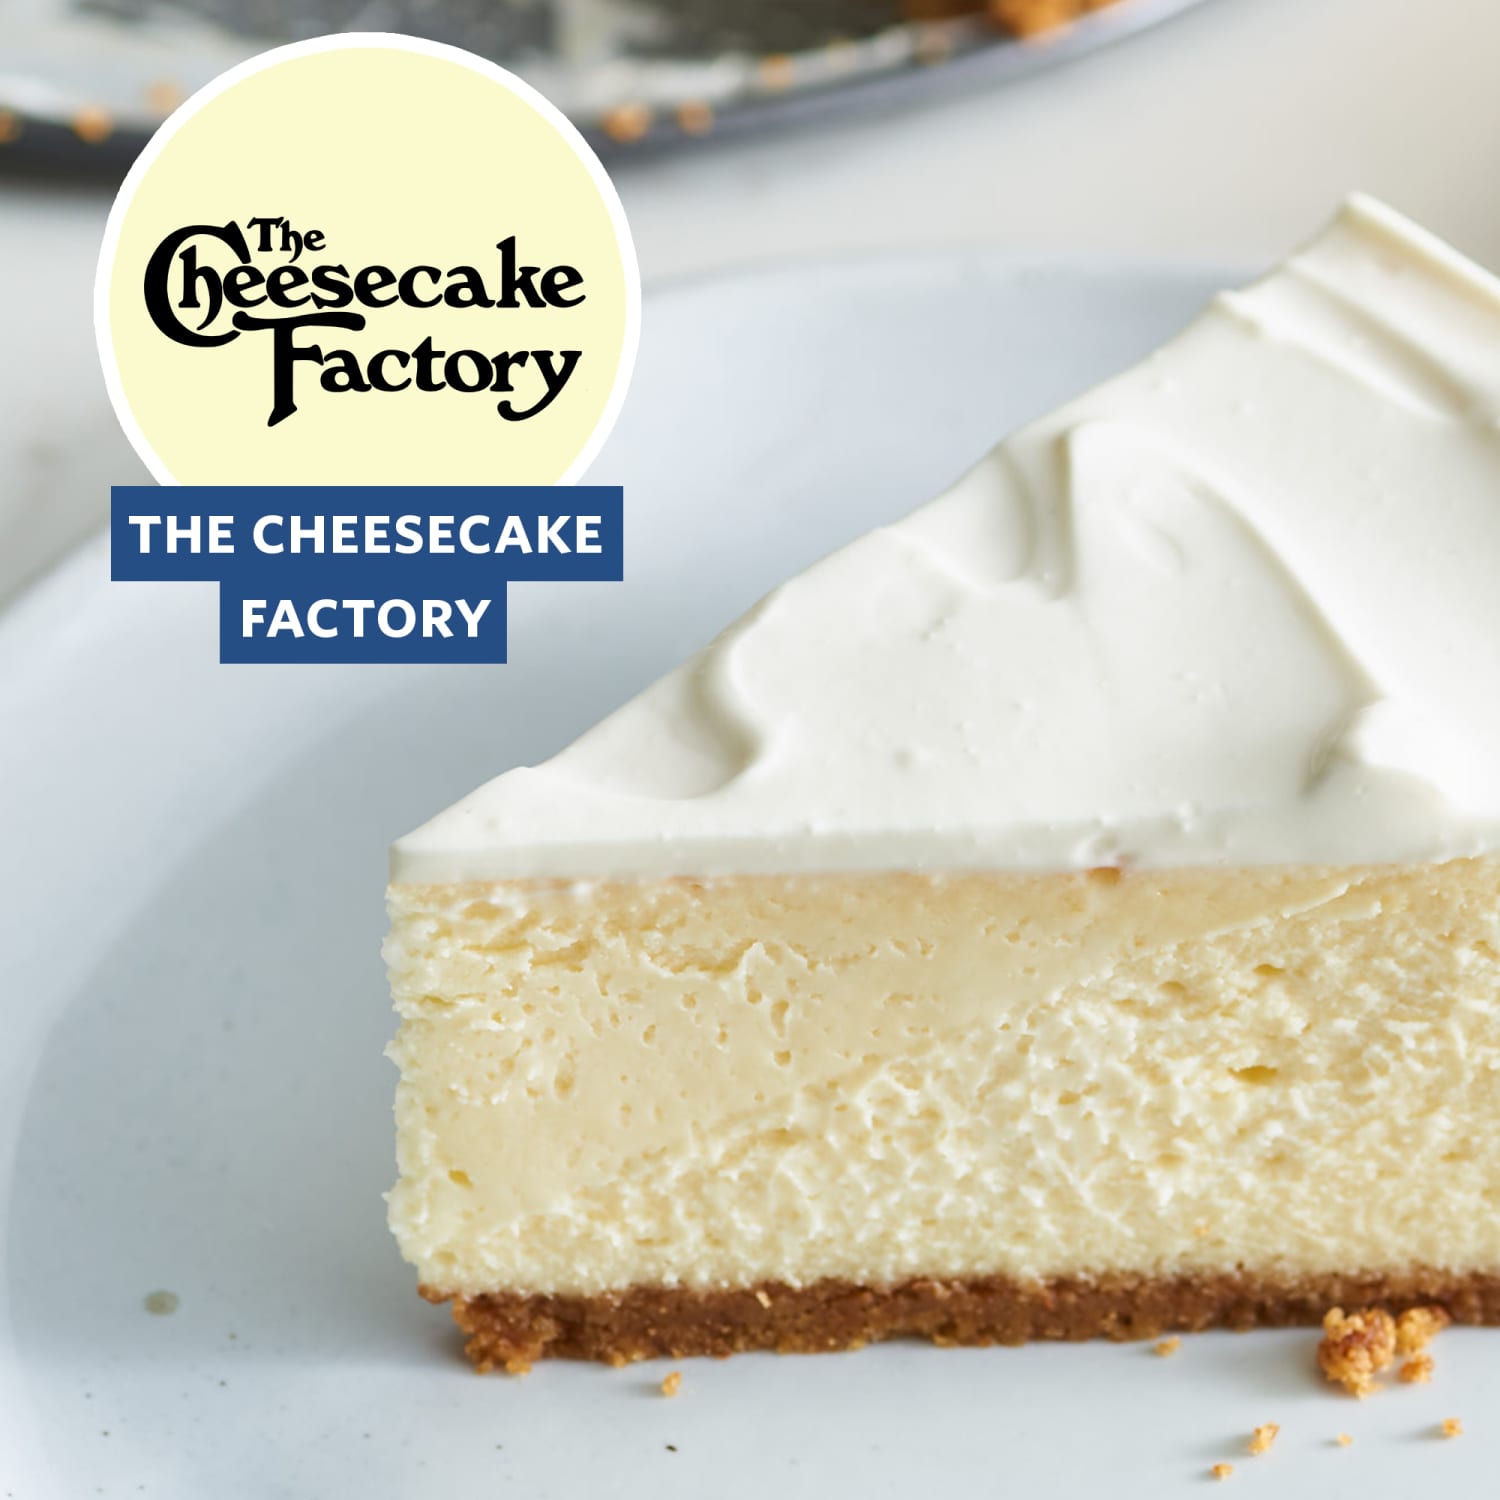 Cheesecake Factory Cheesecake Recipe Review | Kitchn